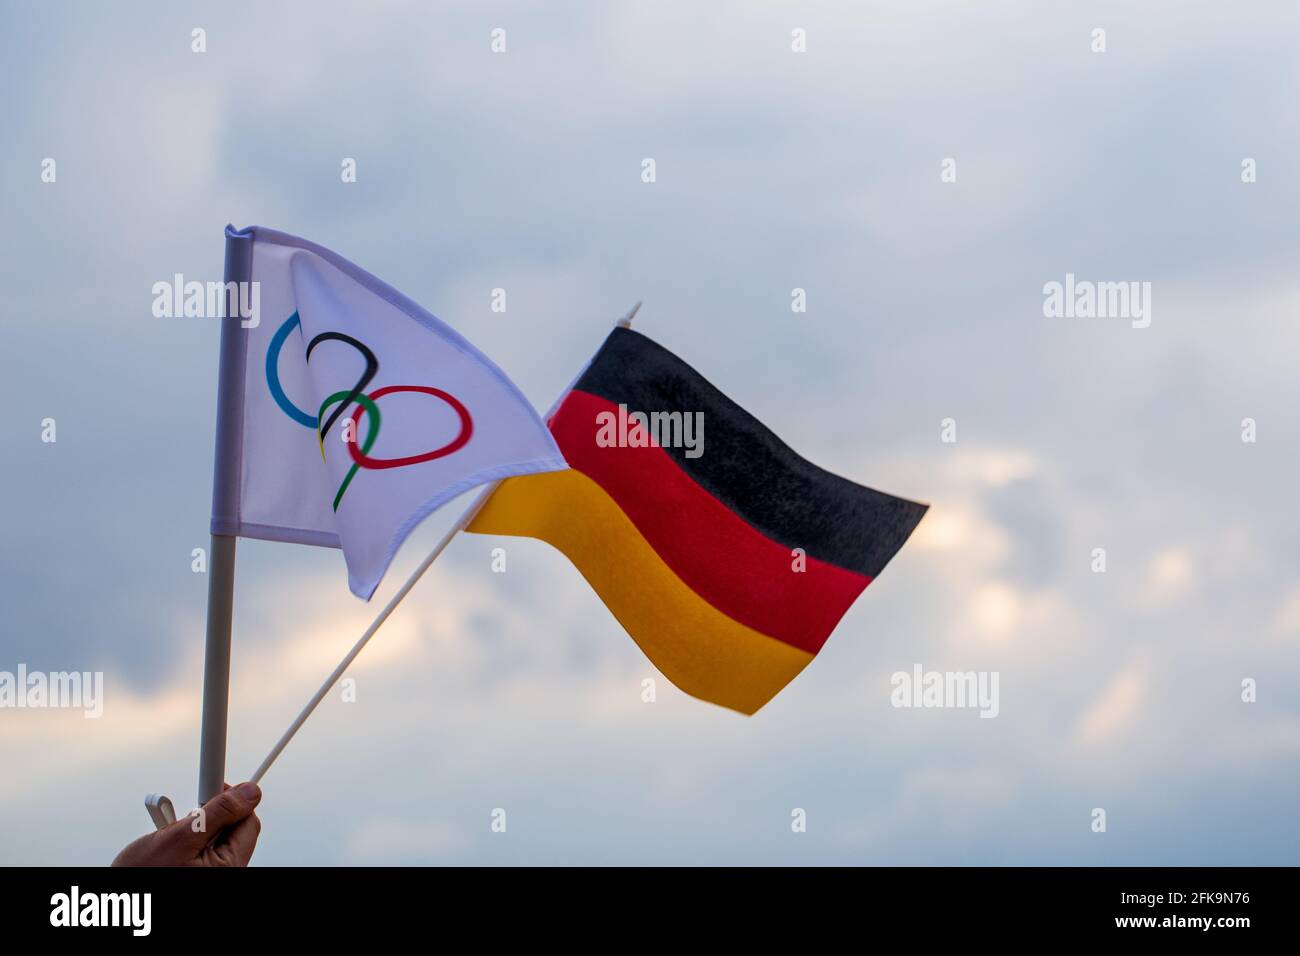 Fan waving the national flag of  Germany and the Olympic flag with symbol olympics rings. Stock Photo